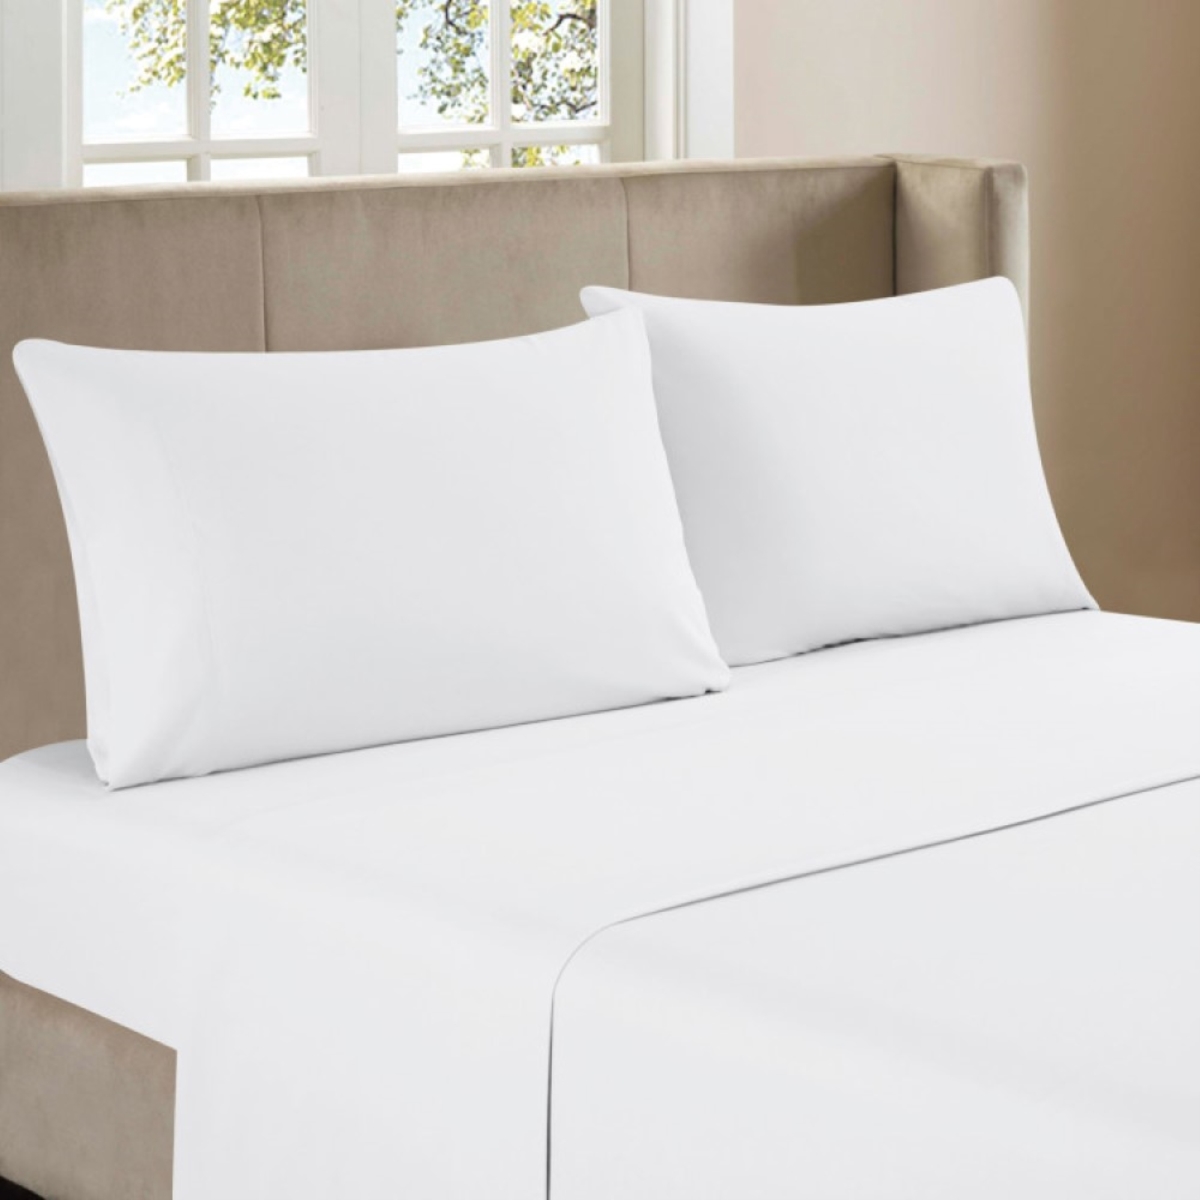 Whtx603-whk Bamboo Sheet Set, Solid White - King Size - 4 Piece